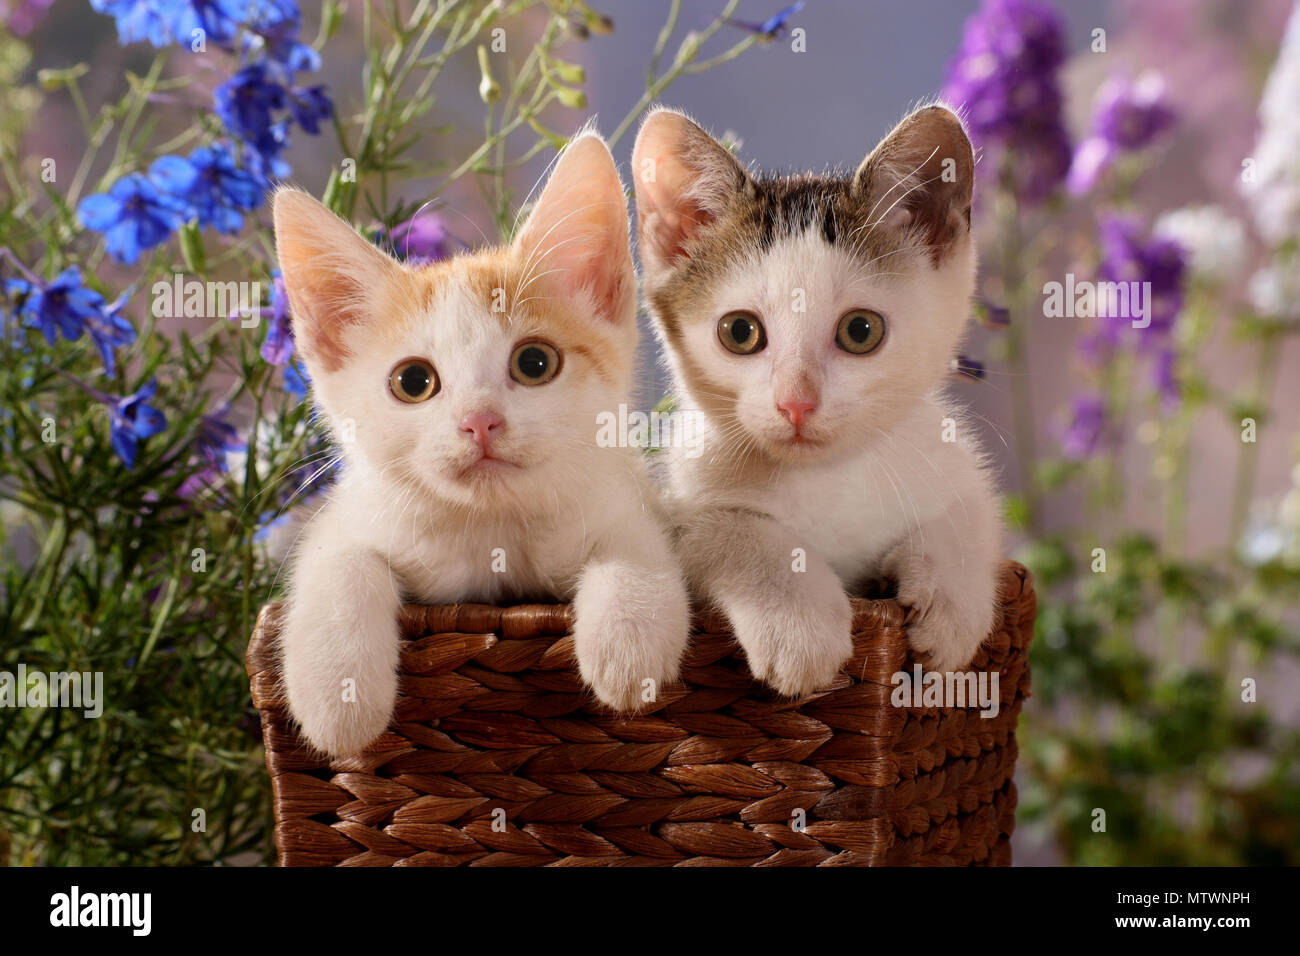 two kittens sitting in a basket Stock Photo